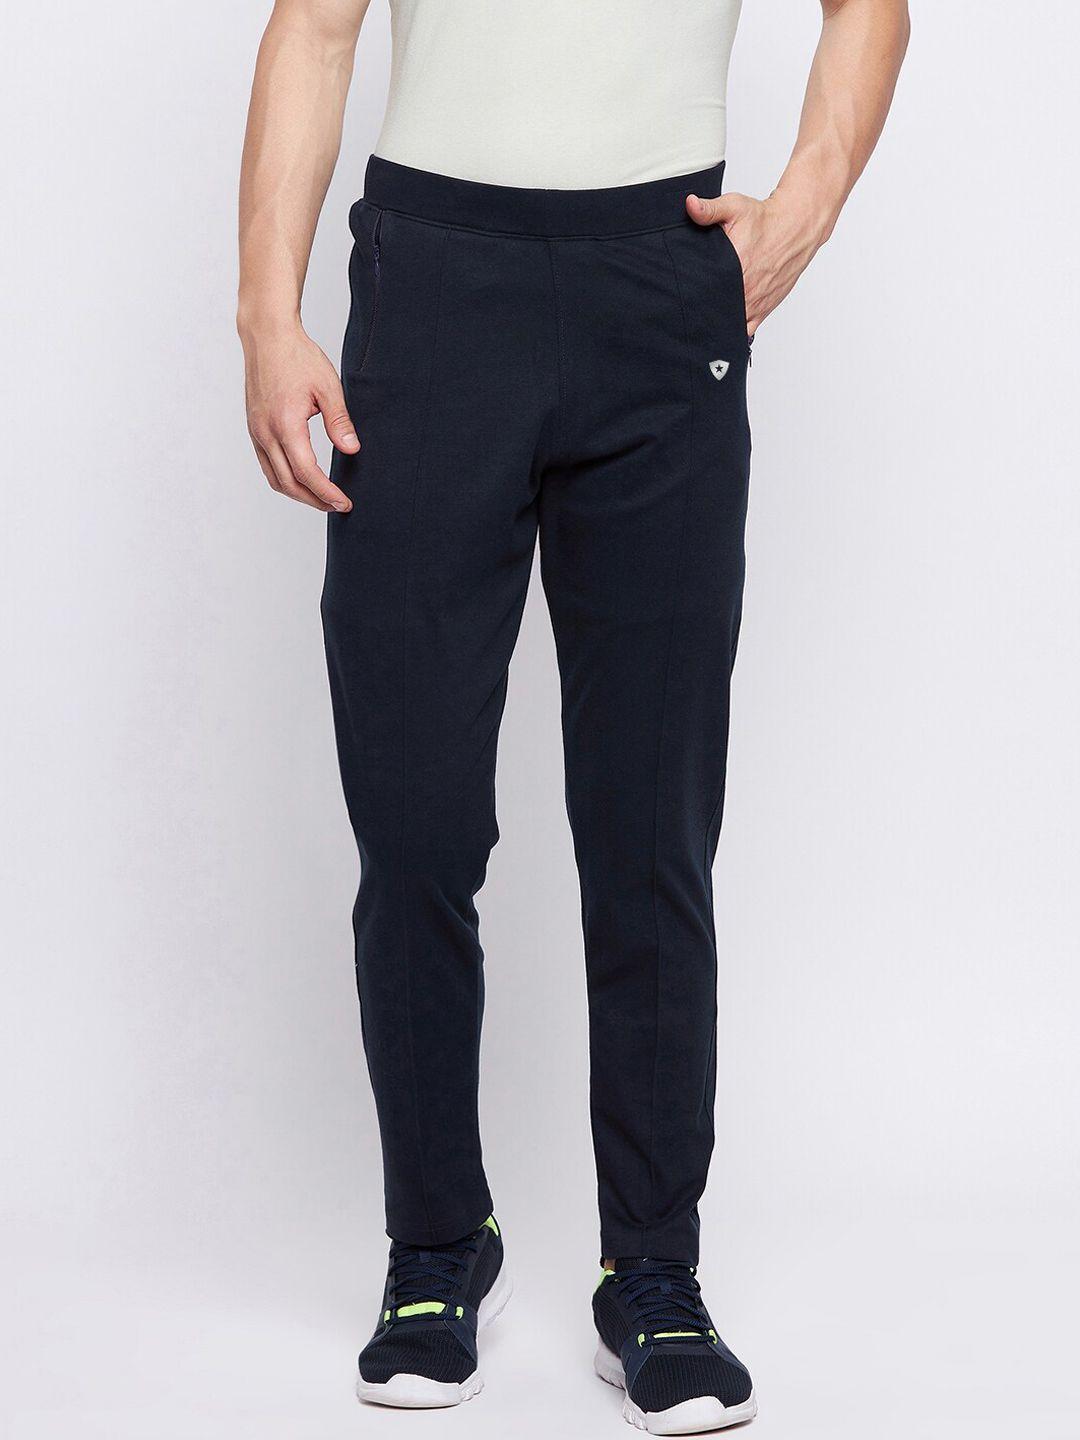 french flexious men navy blue solid dry-fit anti odour regular fit track pants